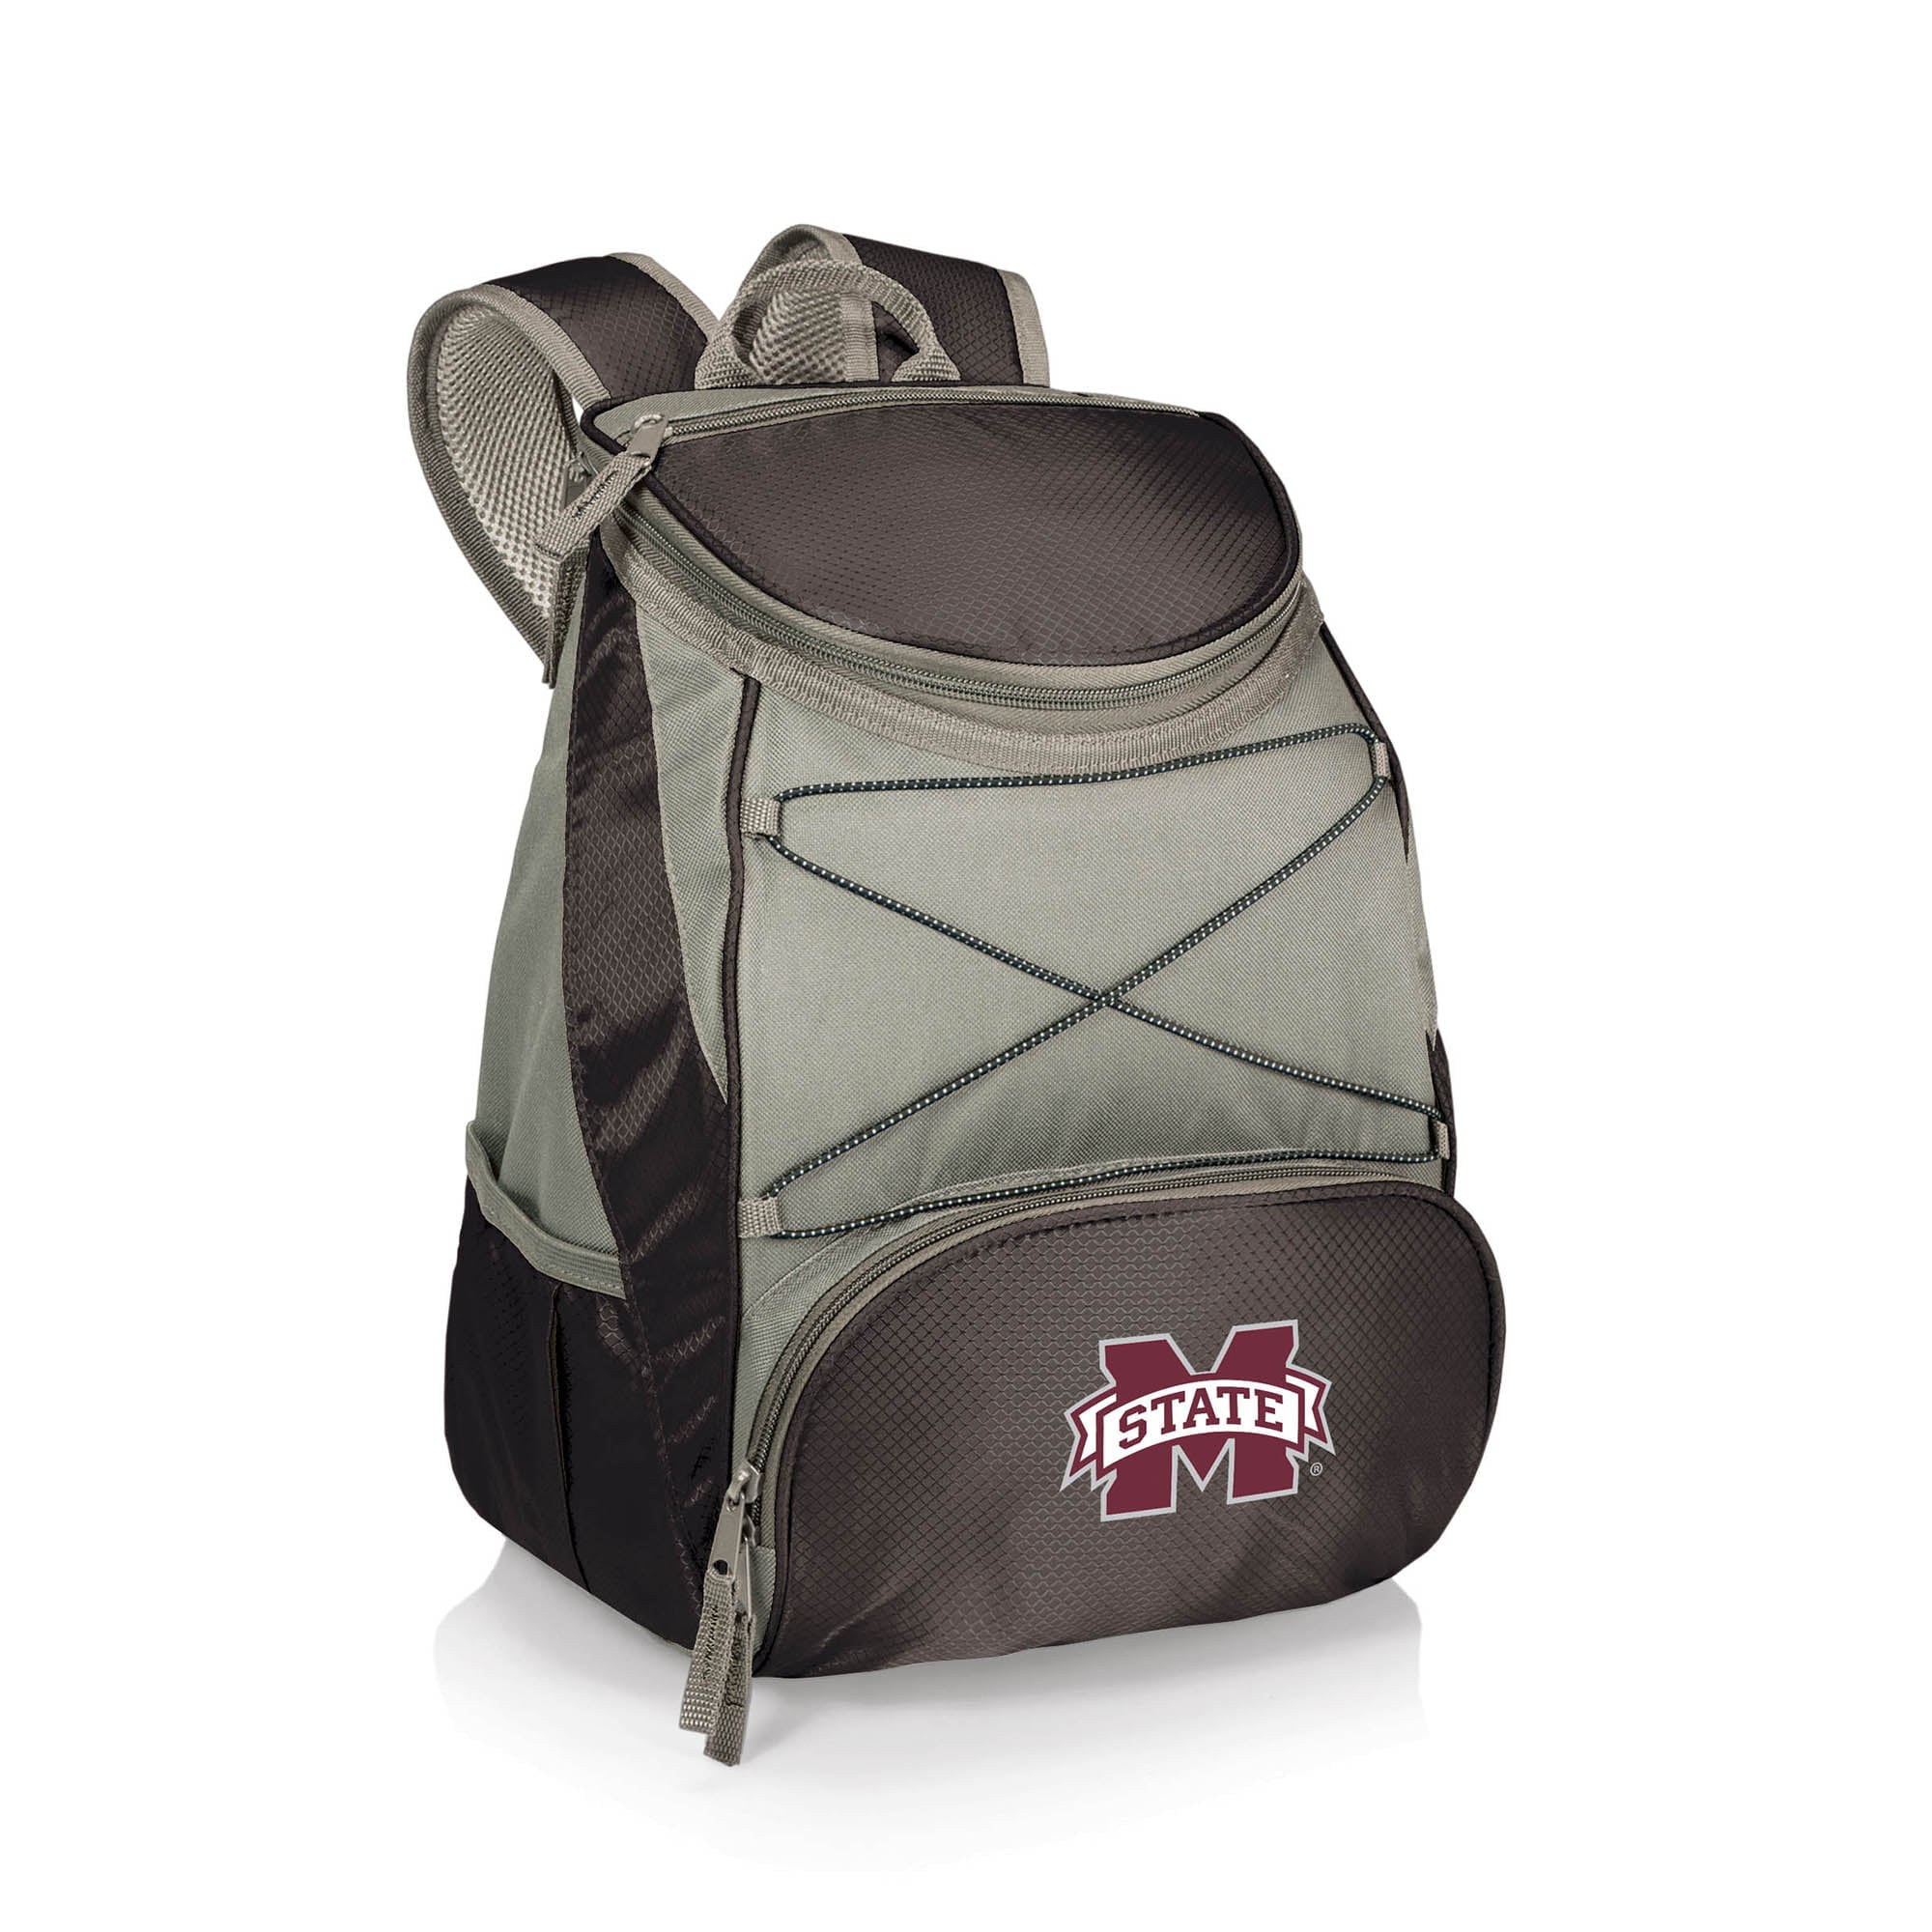 Mississippi State University Laptop Bag Best NCAA MSU Bulldogs Computer Bags